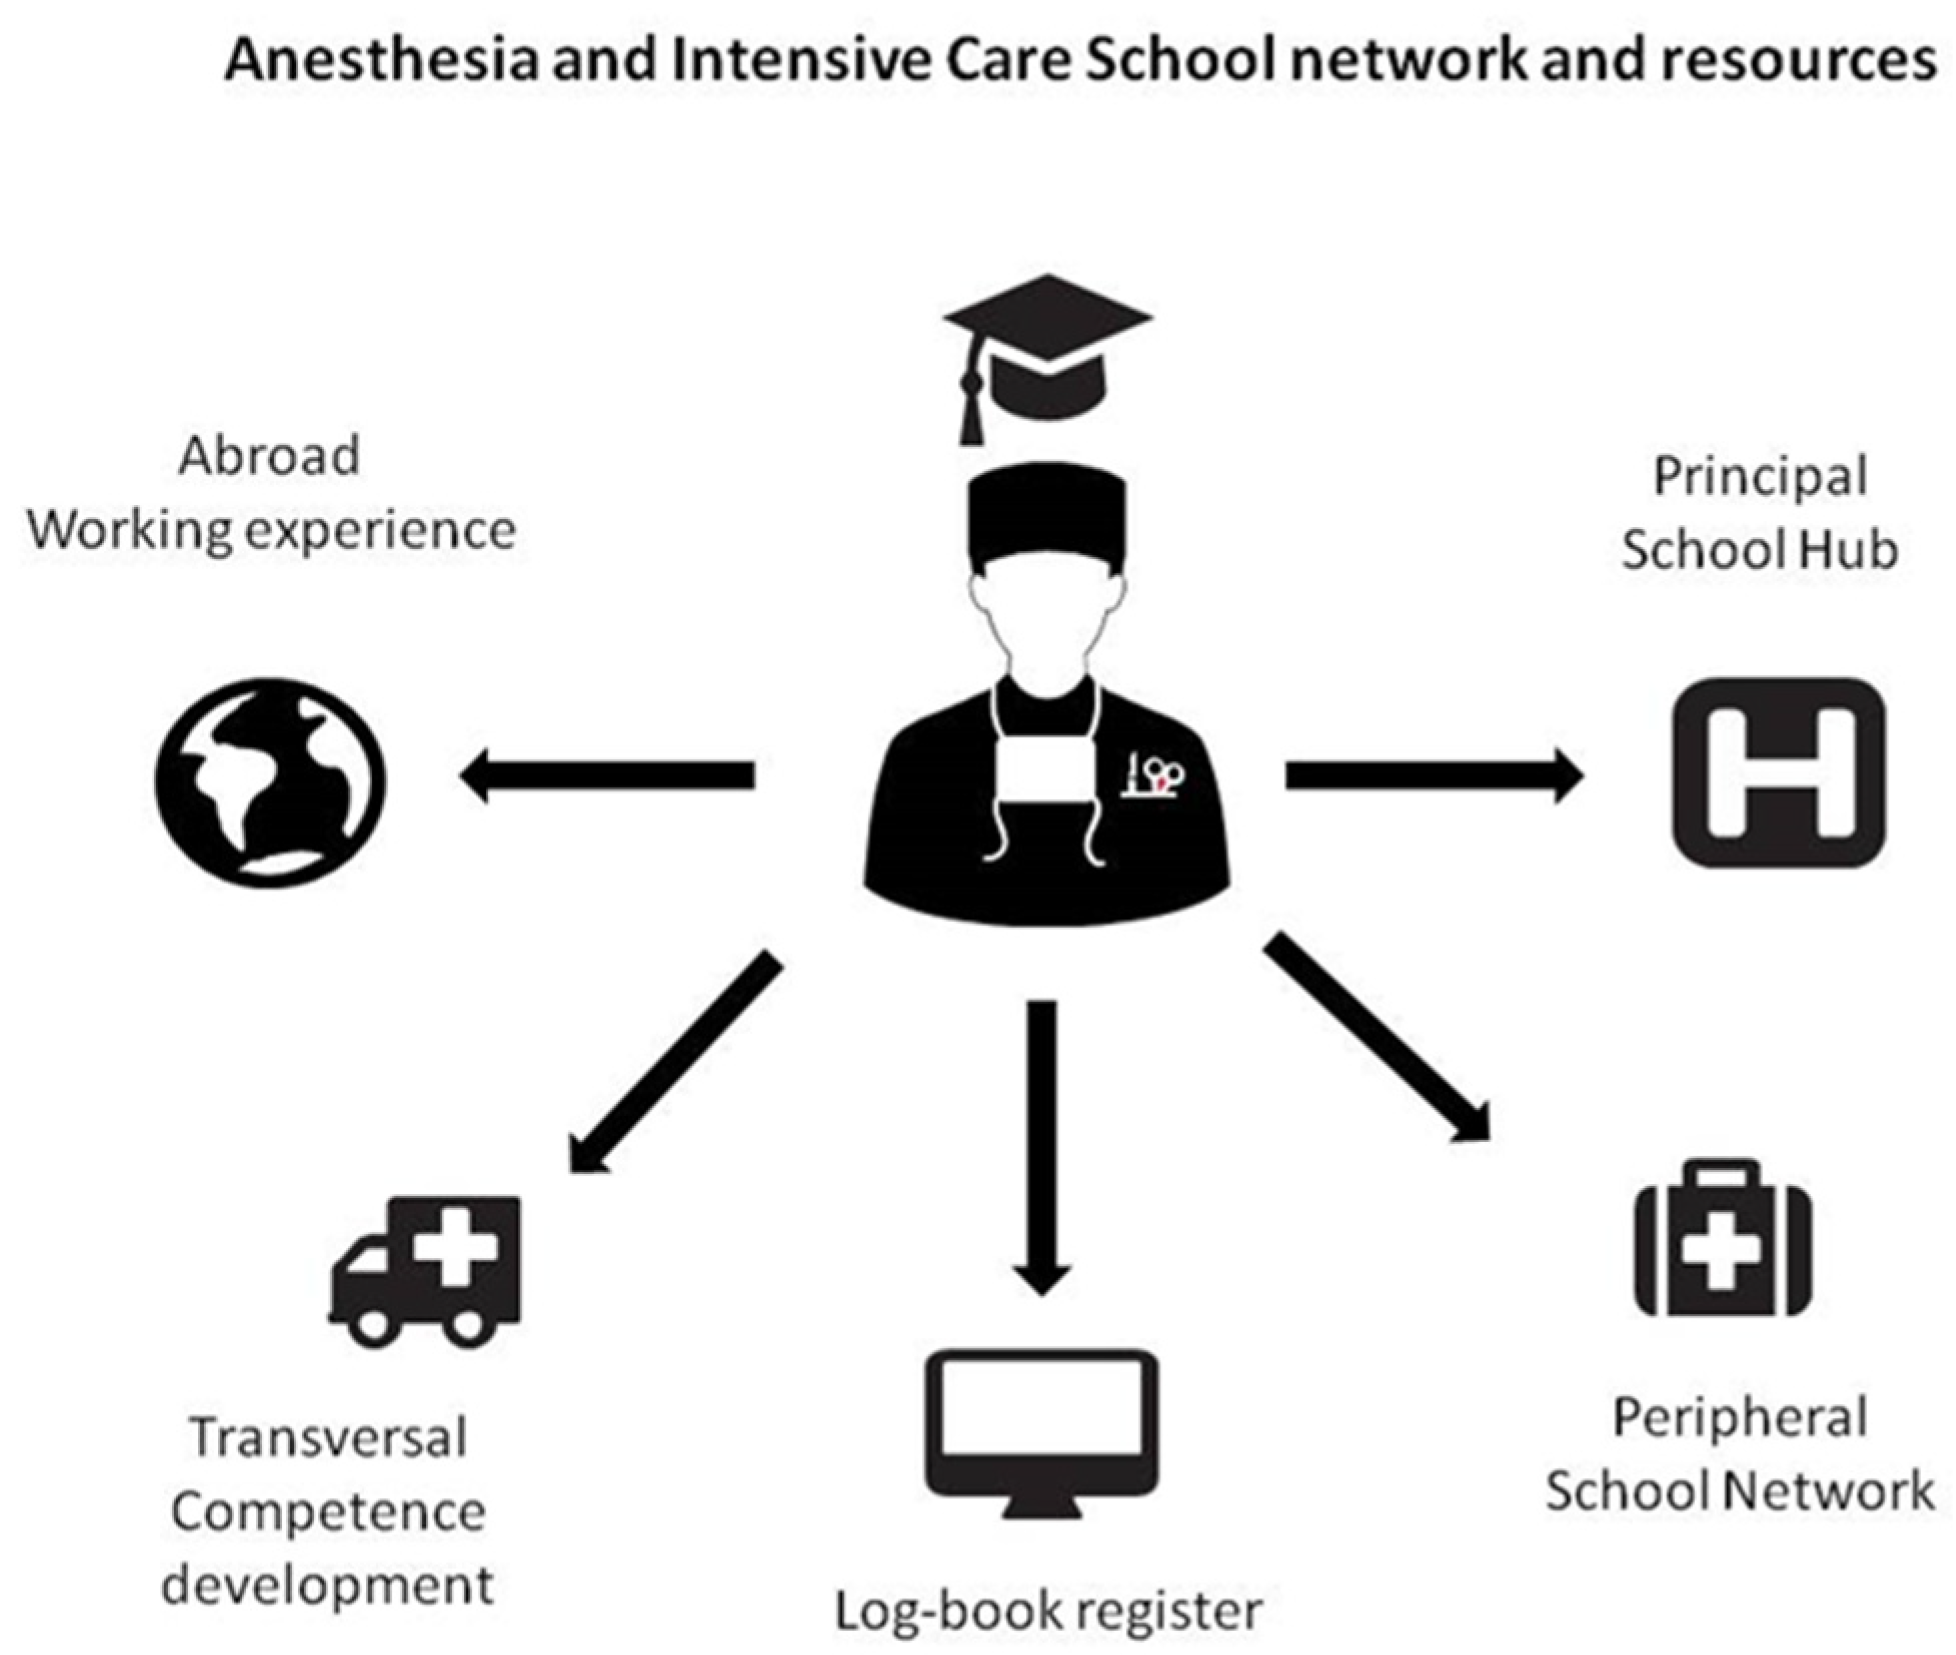 IJERPH Free Full-Text Description, Organization, and Individual Postgraduate Perspectives of One Italian School of Anesthesia and Intensive Care